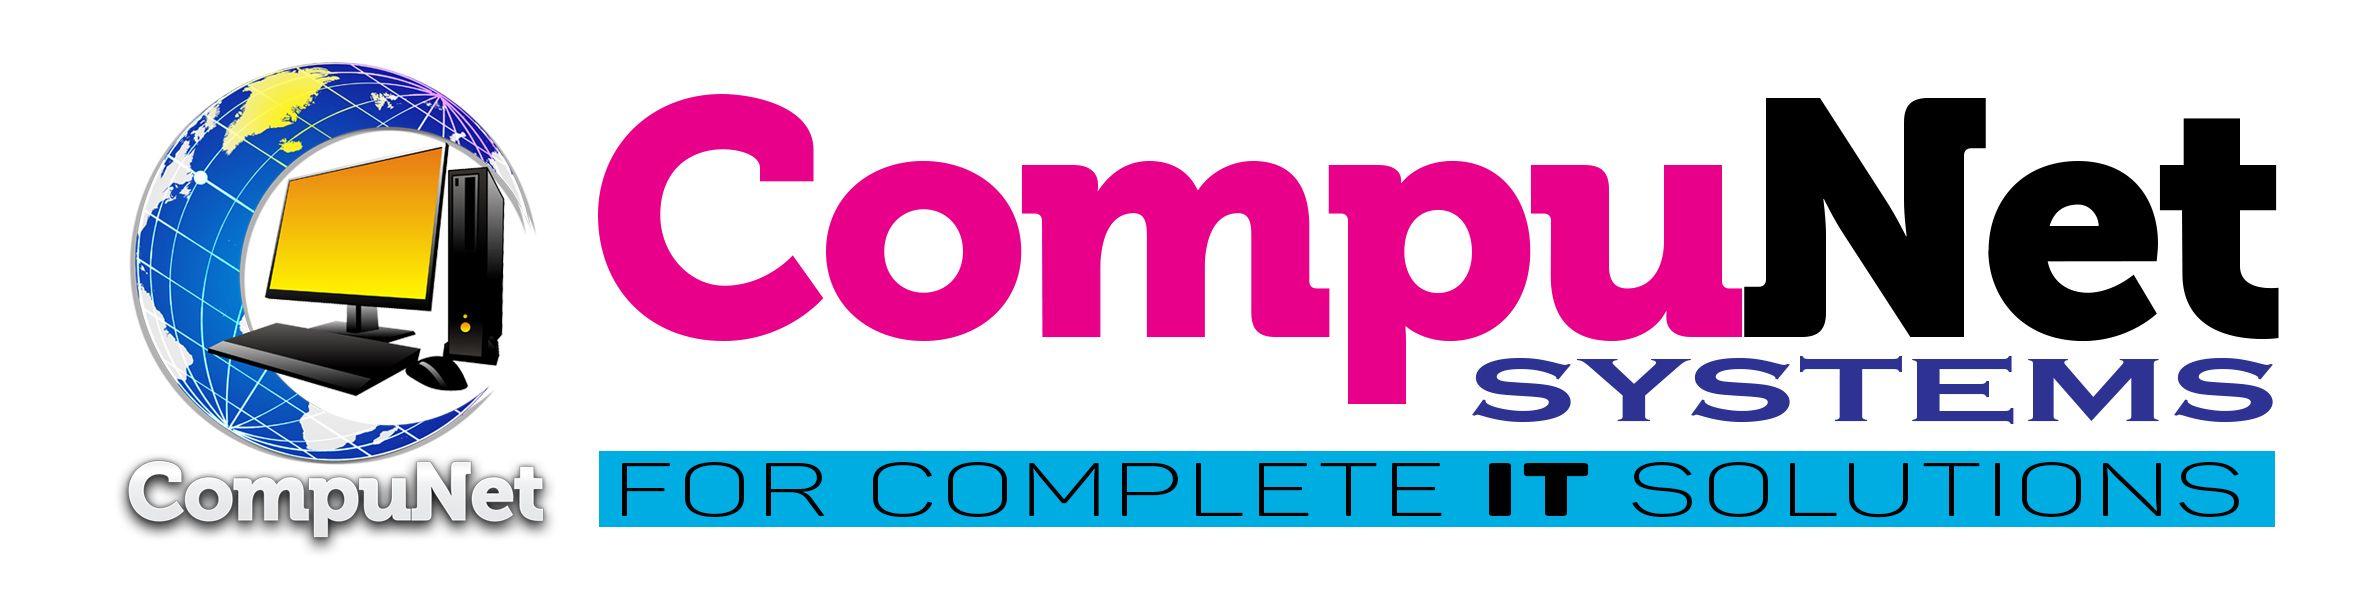 Compunet Logo - Search2day Business Classified | CompuNet Systems